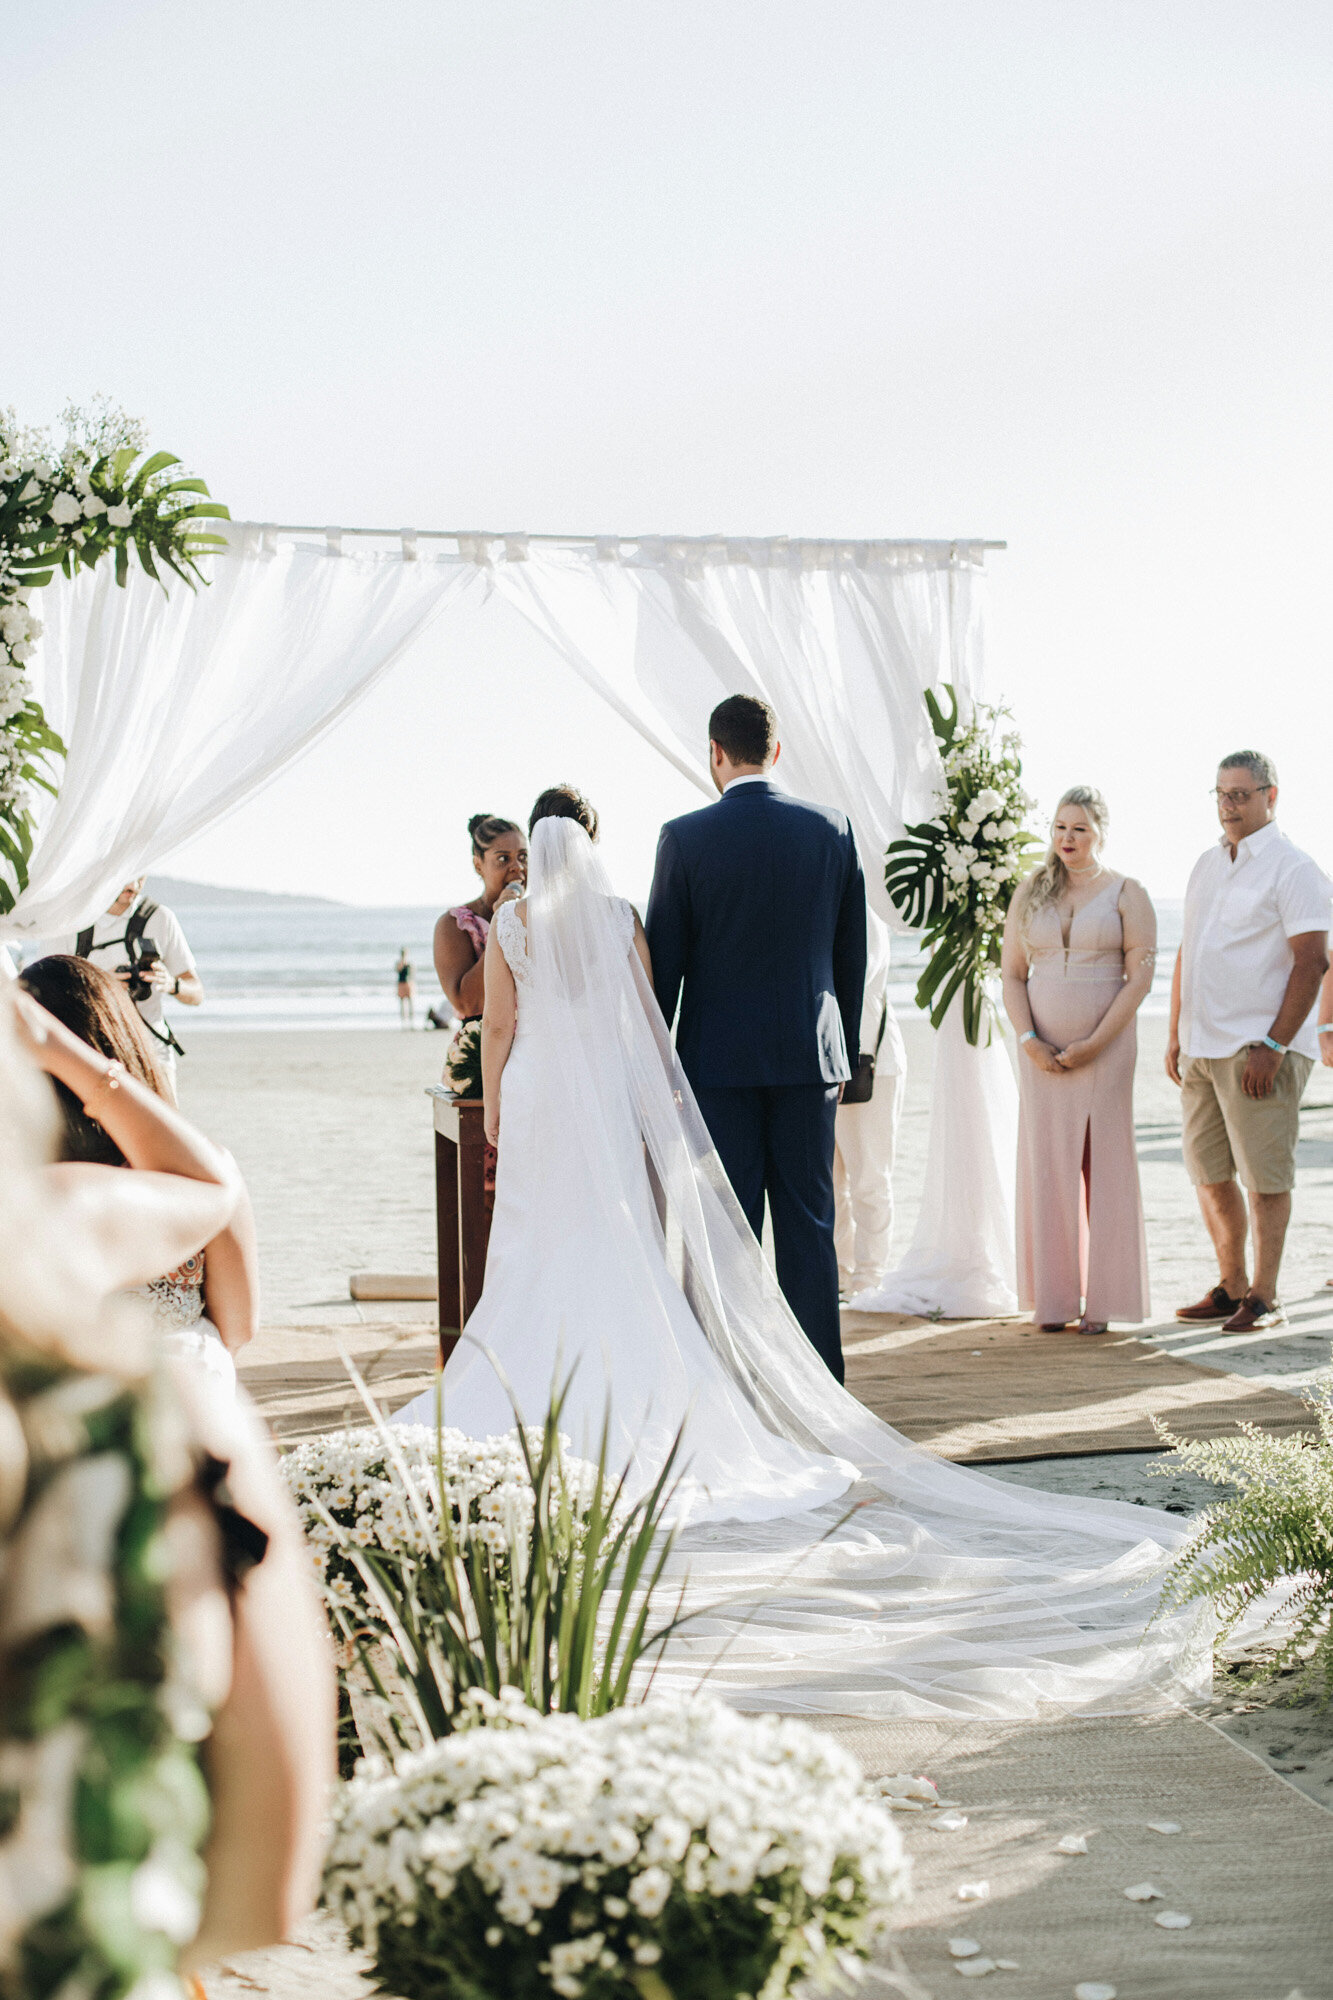 Beach wedding ceremony, the bride and the groom with the officiant